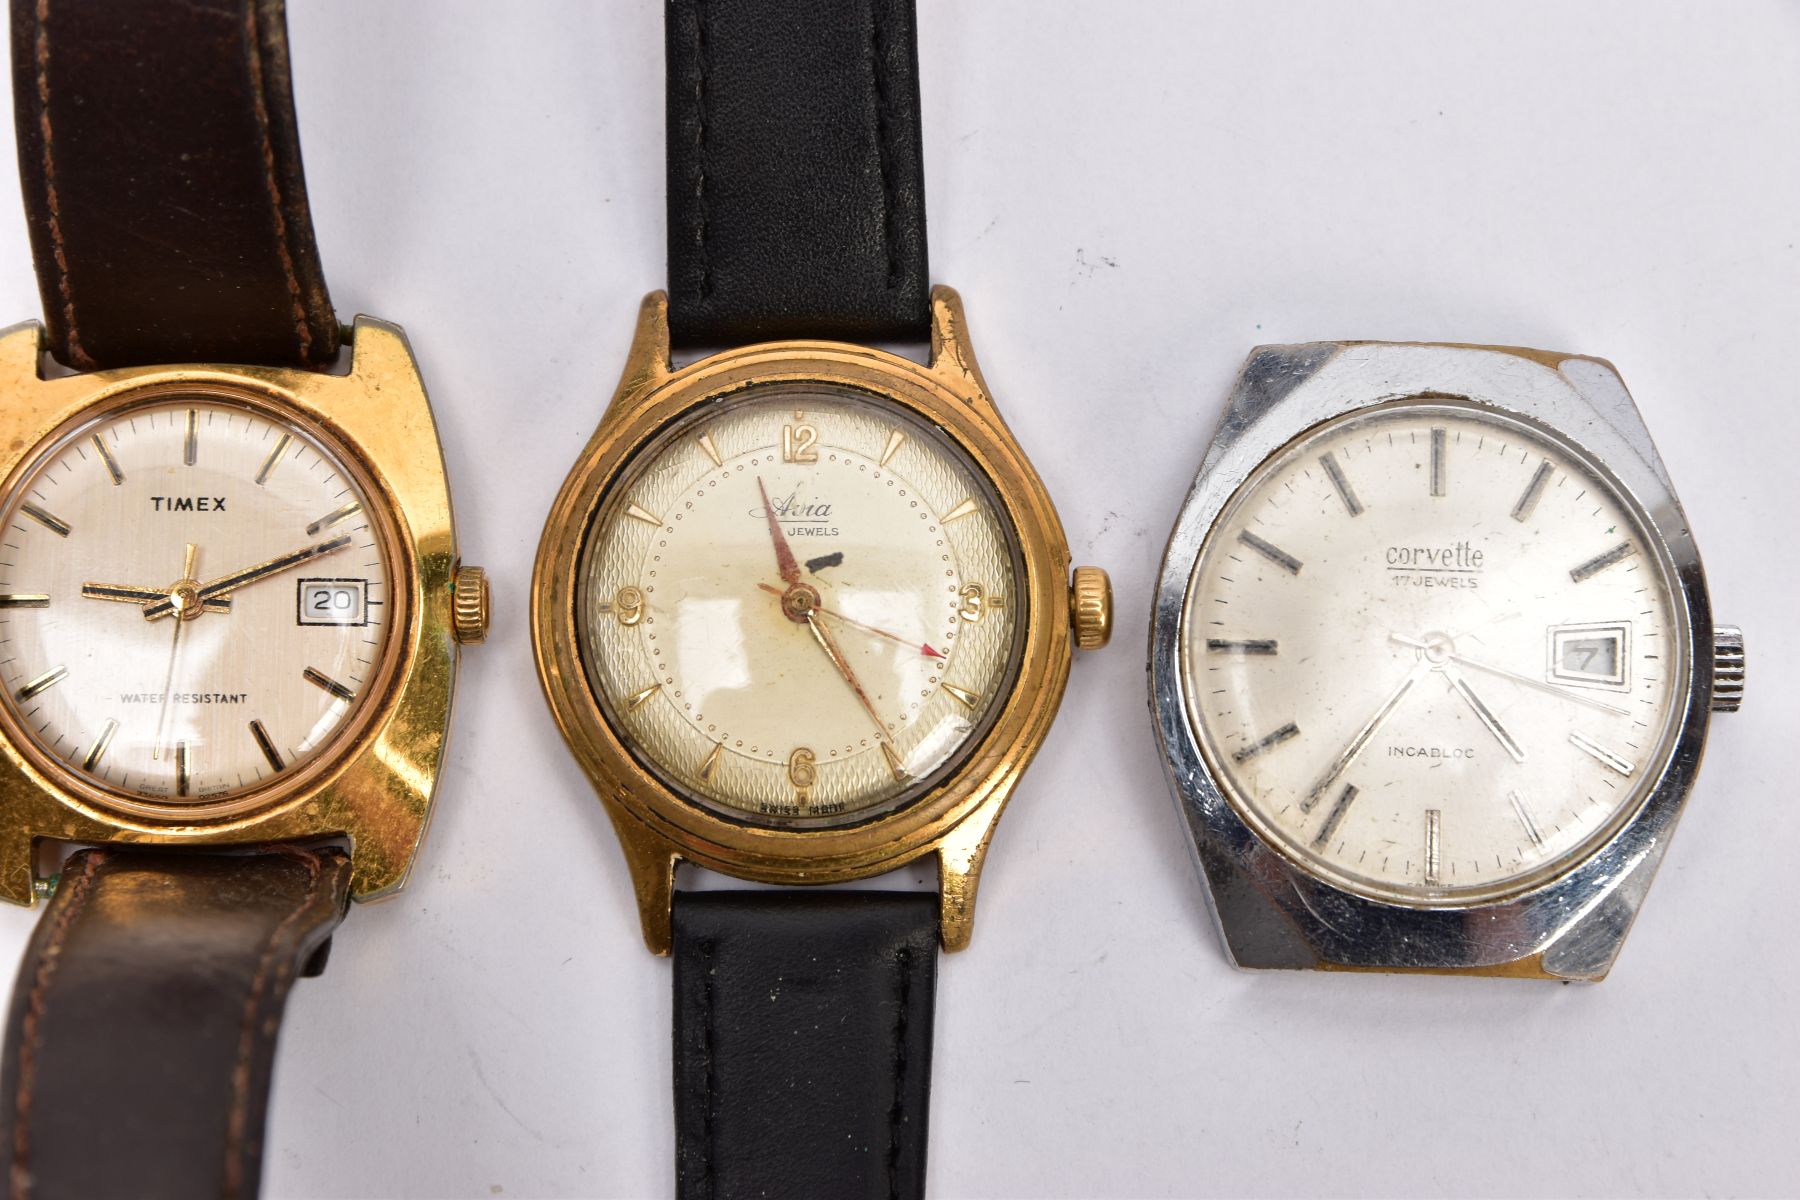 THREE GENTLEMAN'S WATCHES AND A WATCH HEAD, to include Sekonda, Avia, Timex and a Corvette watch - Image 3 of 4